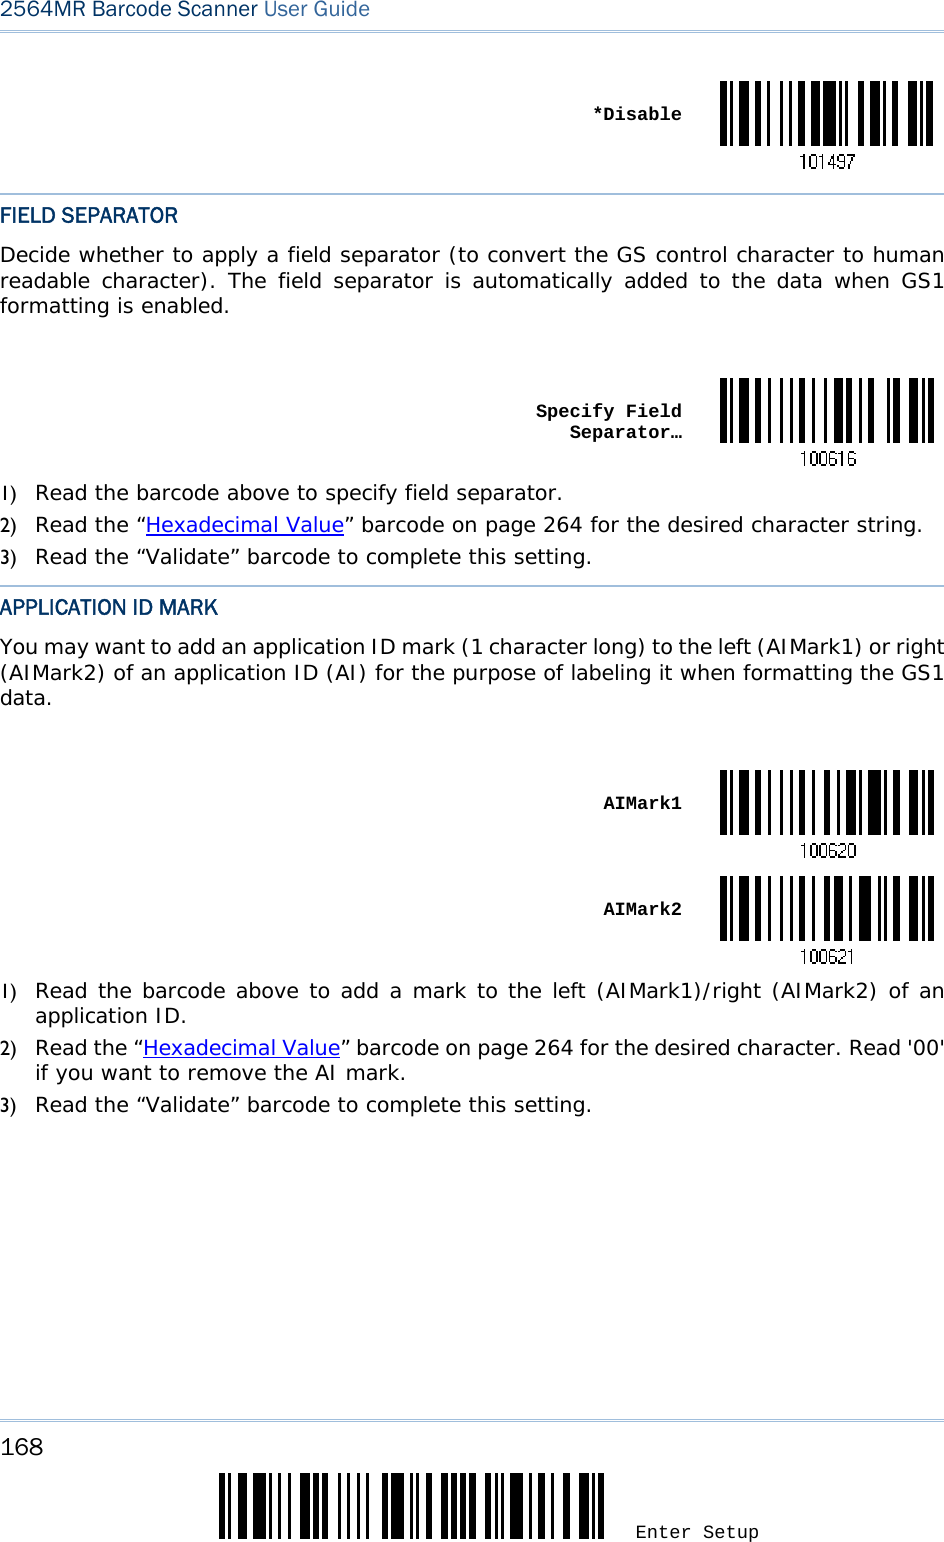 168 Enter Setup 2564MR Barcode Scanner User Guide   *DisableFIELD SEPARATOR Decide whether to apply a field separator (to convert the GS control character to human readable character). The field separator is automatically added to the data when GS1 formatting is enabled.   Specify Field Separator…1) Read the barcode above to specify field separator. 2) Read the “Hexadecimal Value” barcode on page 264 for the desired character string. 3) Read the “Validate” barcode to complete this setting. APPLICATION ID MARK You may want to add an application ID mark (1 character long) to the left (AIMark1) or right (AIMark2) of an application ID (AI) for the purpose of labeling it when formatting the GS1 data.   AIMark1 AIMark21) Read the barcode above to add a mark to the left (AIMark1)/right (AIMark2) of an application ID. 2) Read the “Hexadecimal Value” barcode on page 264 for the desired character. Read &apos;00&apos; if you want to remove the AI mark. 3) Read the “Validate” barcode to complete this setting. 